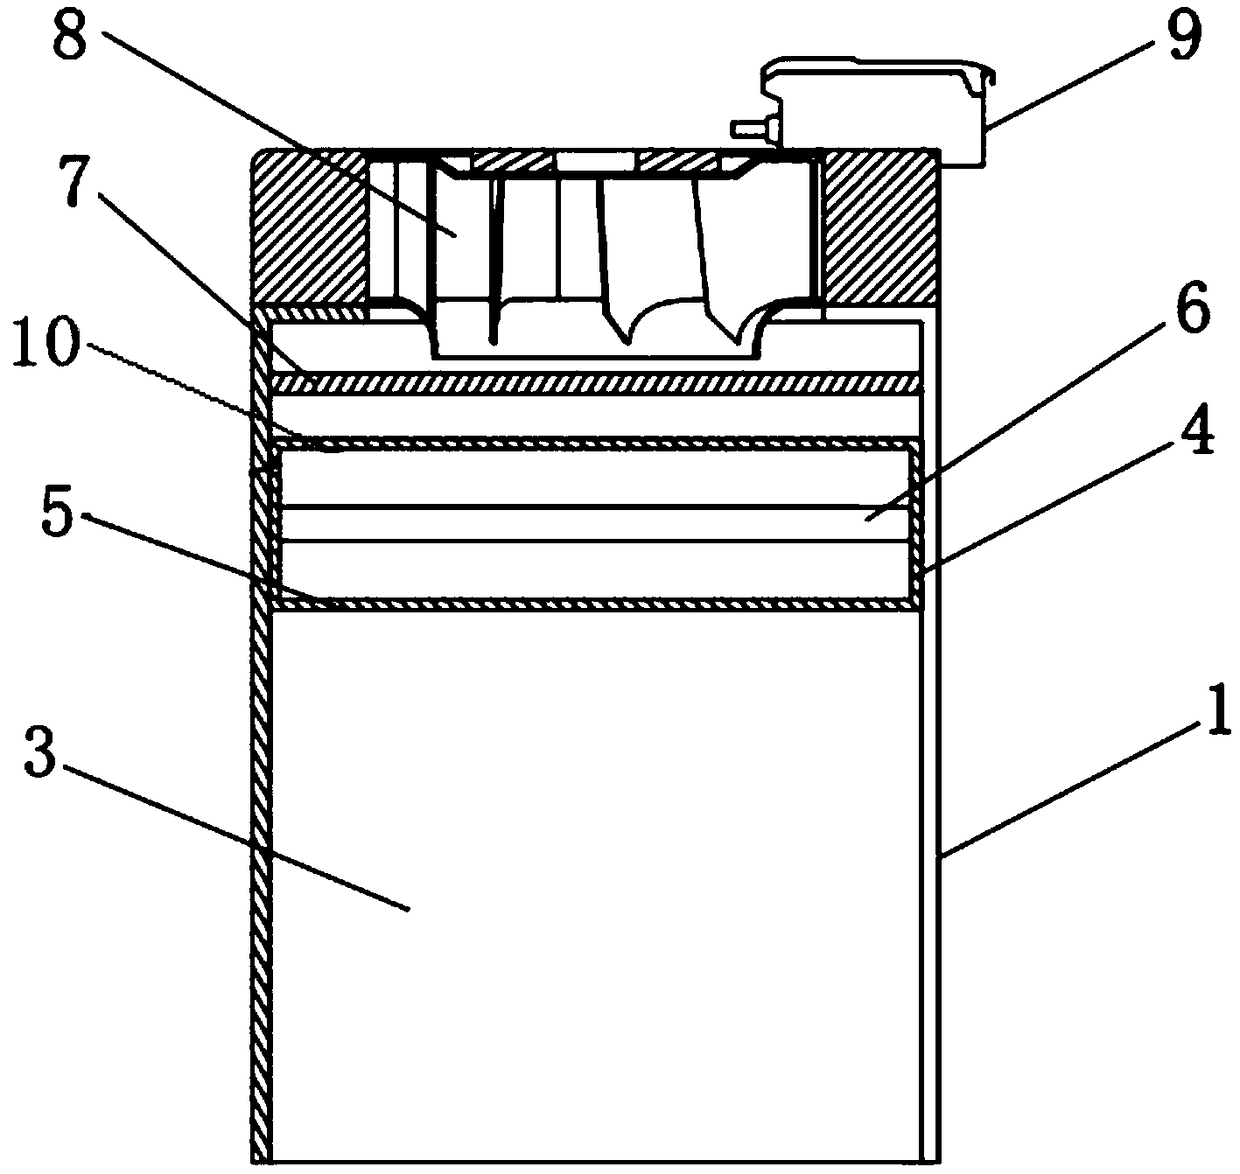 Particle processing device of printer